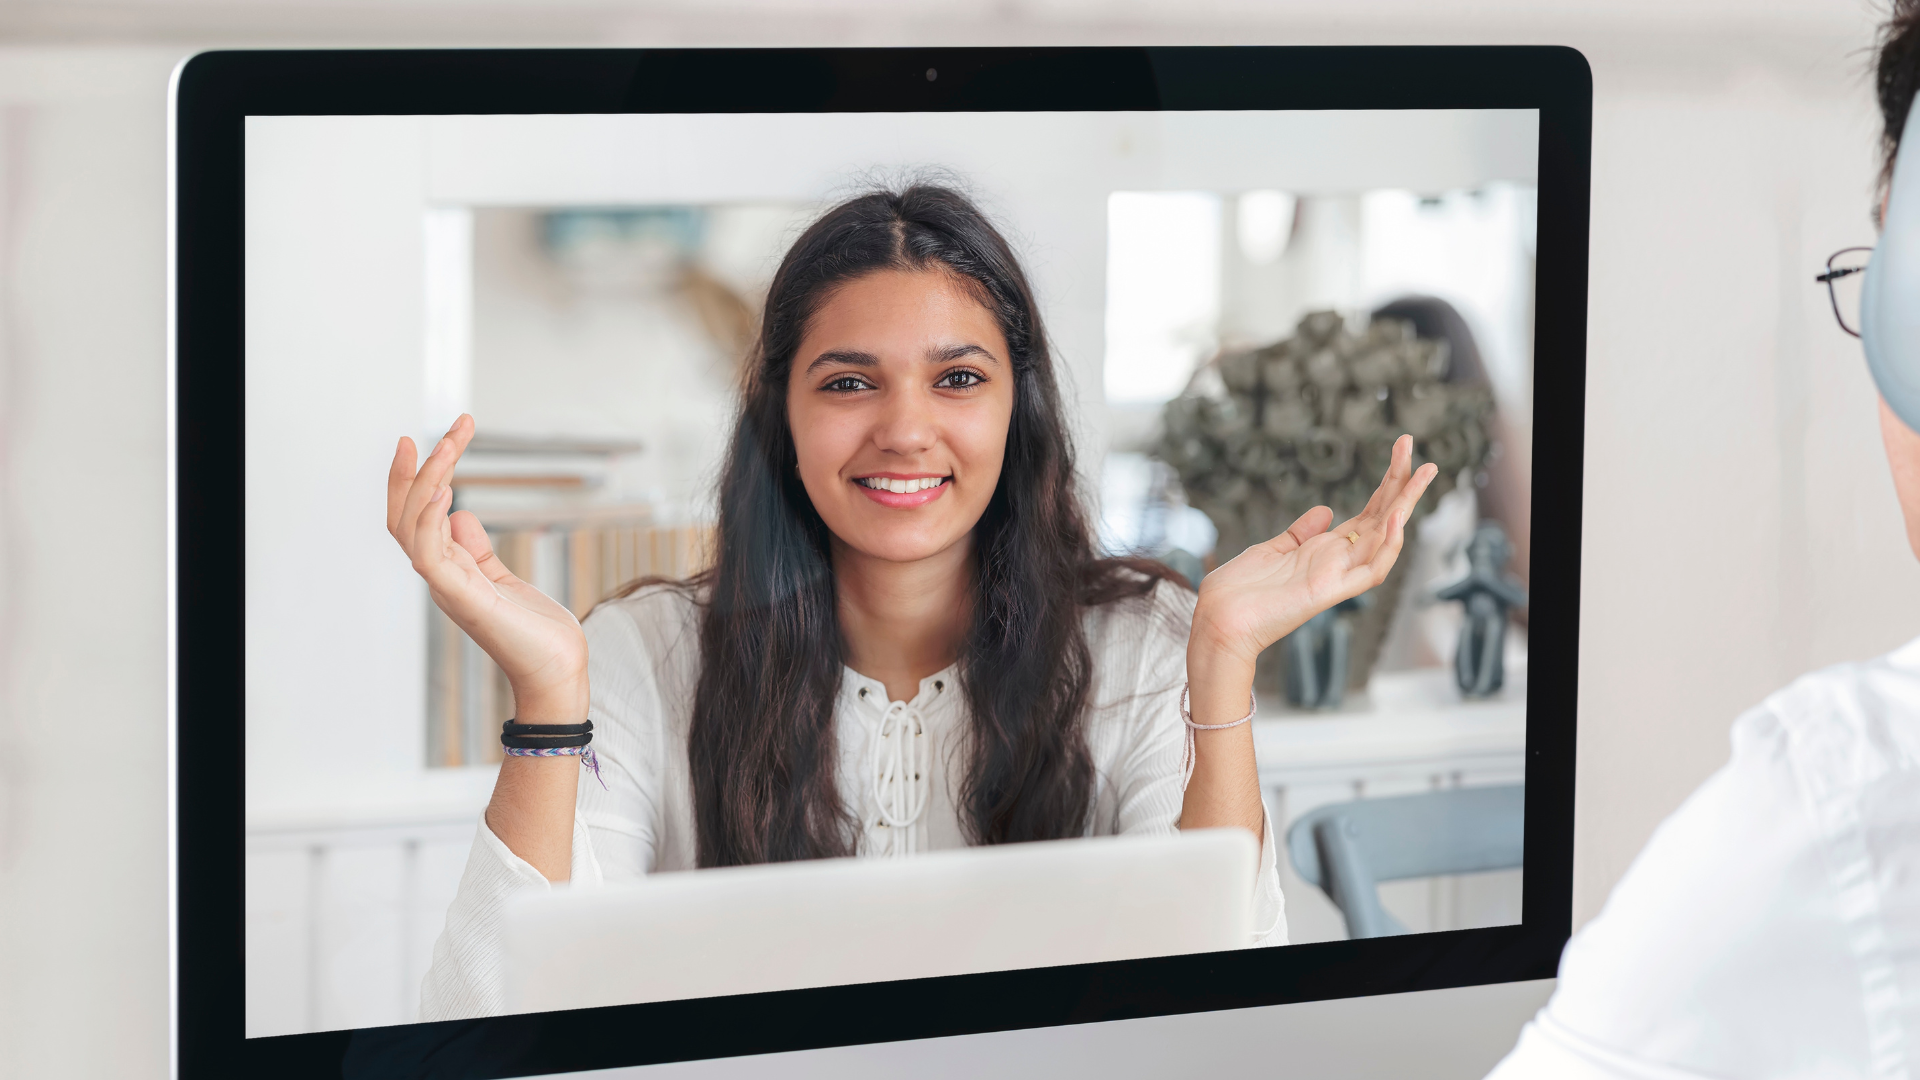 An image of a person video chatting a woman